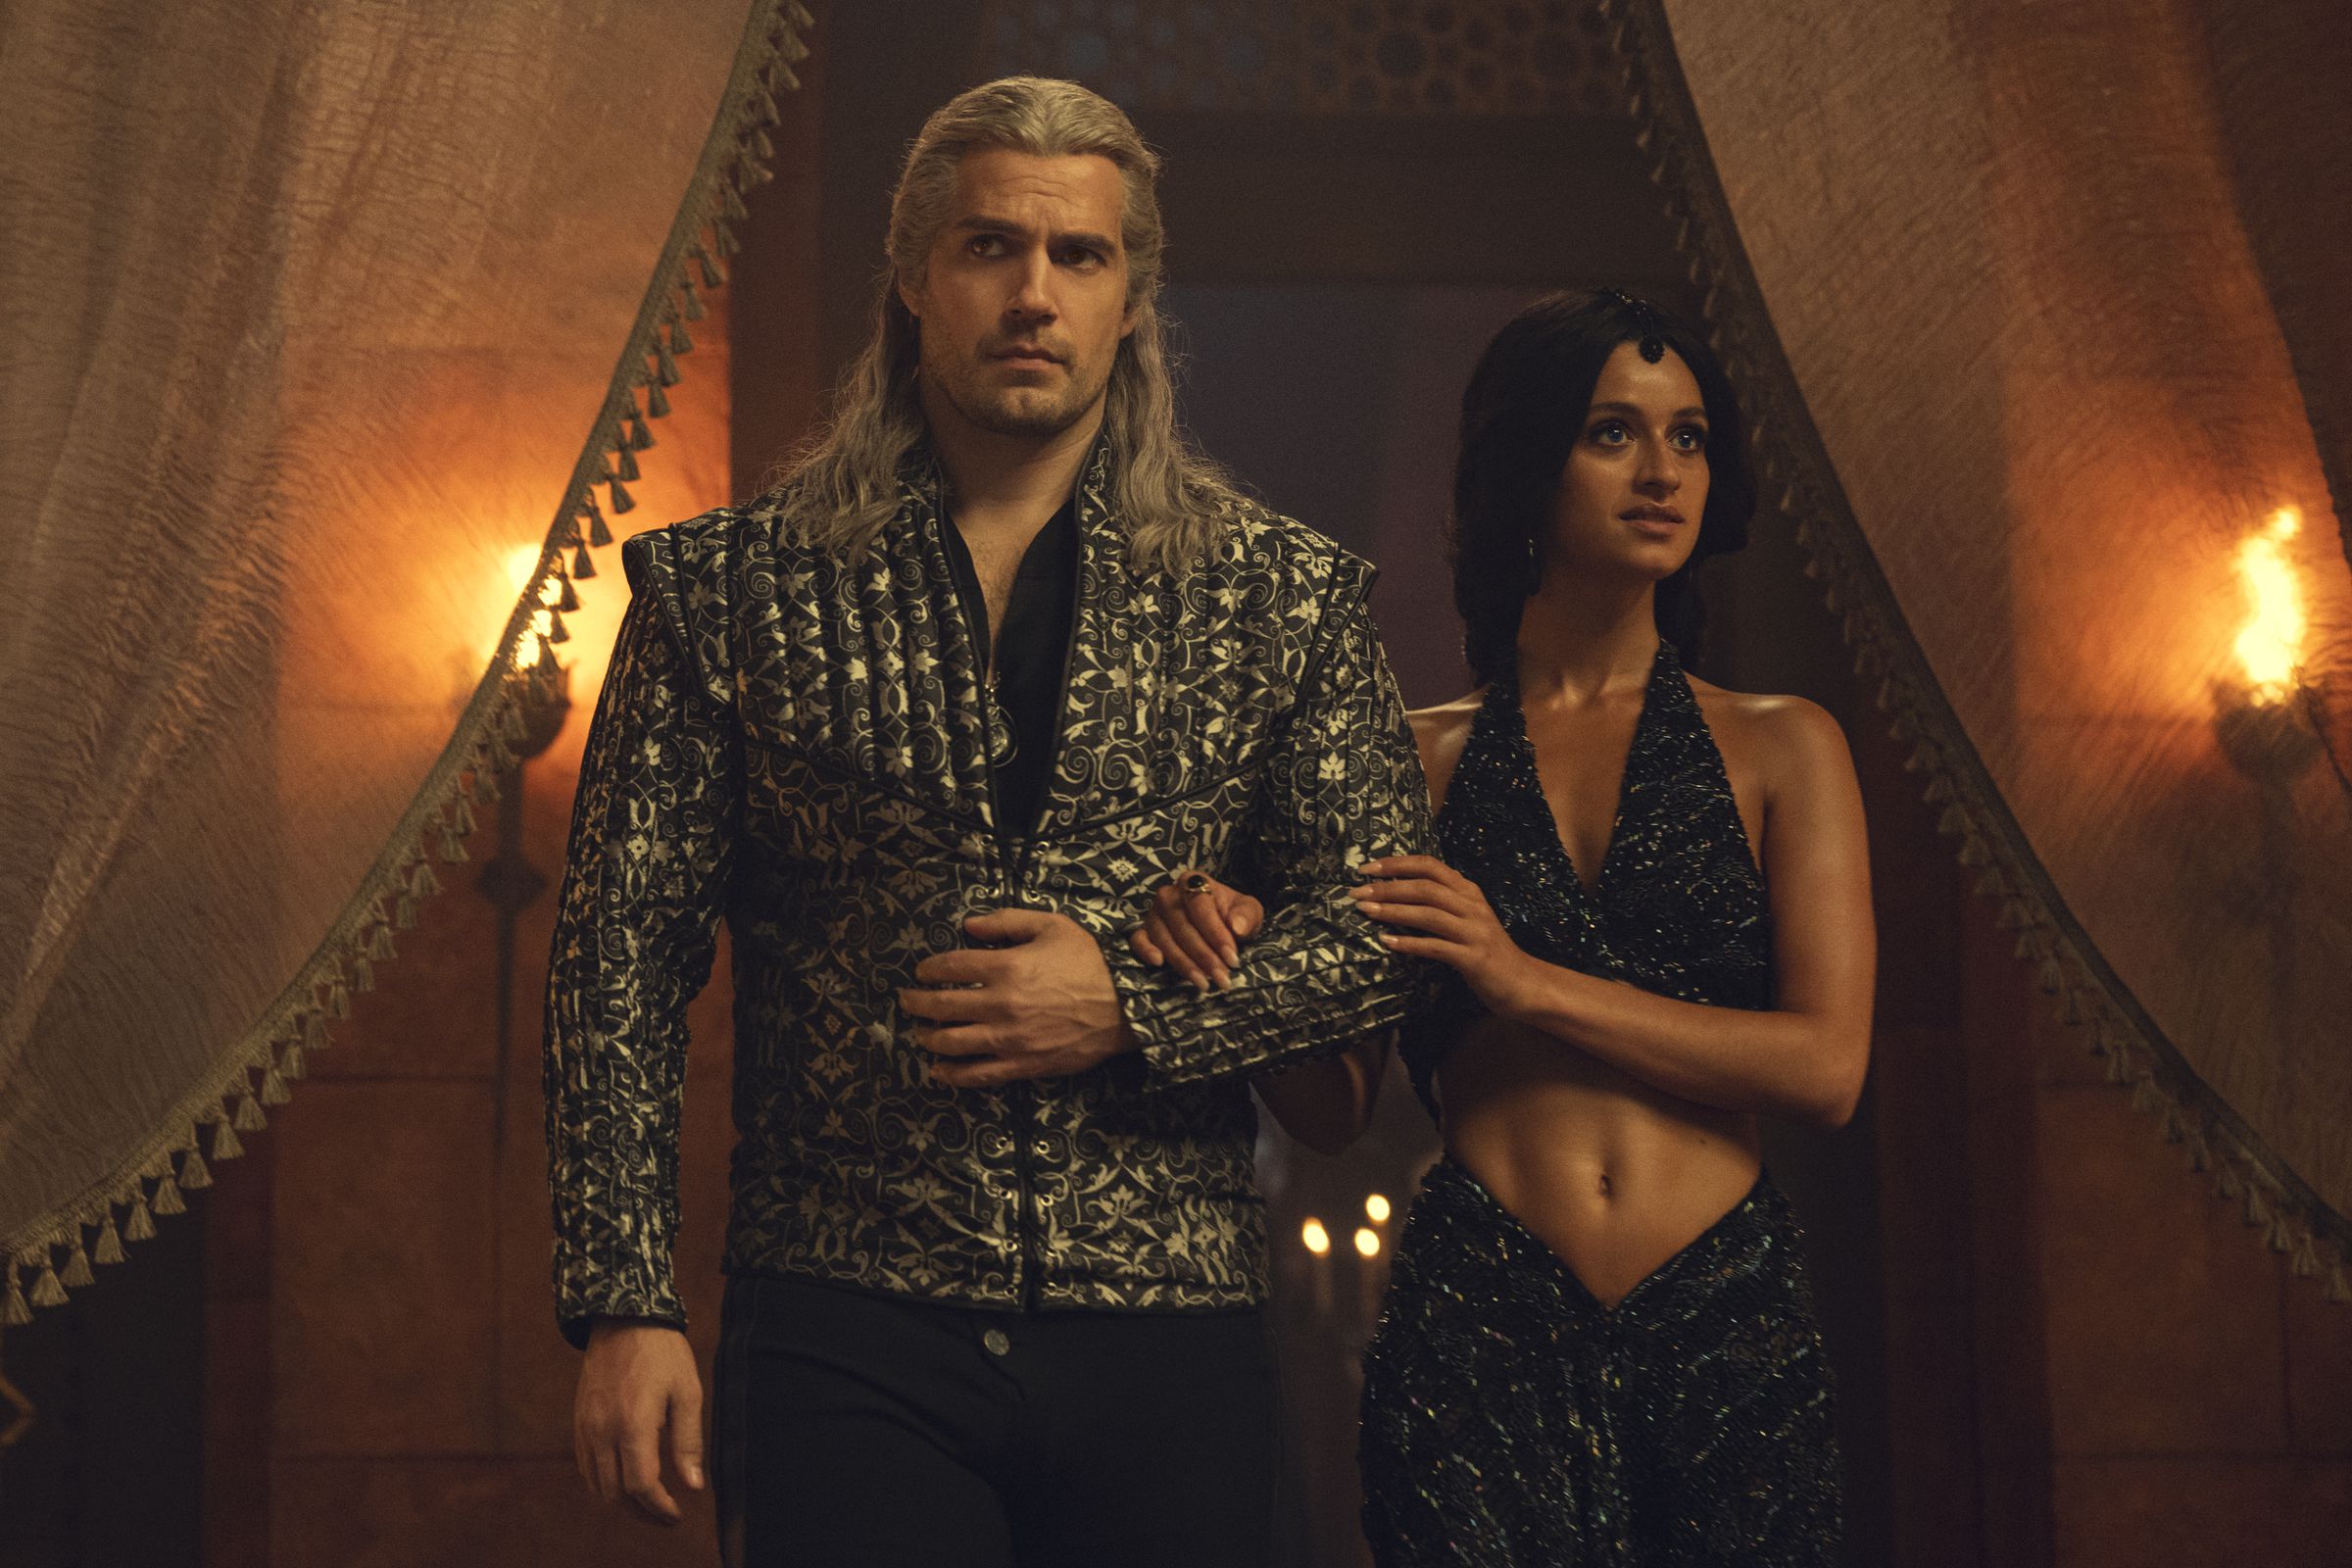 Henry Cavill and Anya Chalotra in The Witcher.